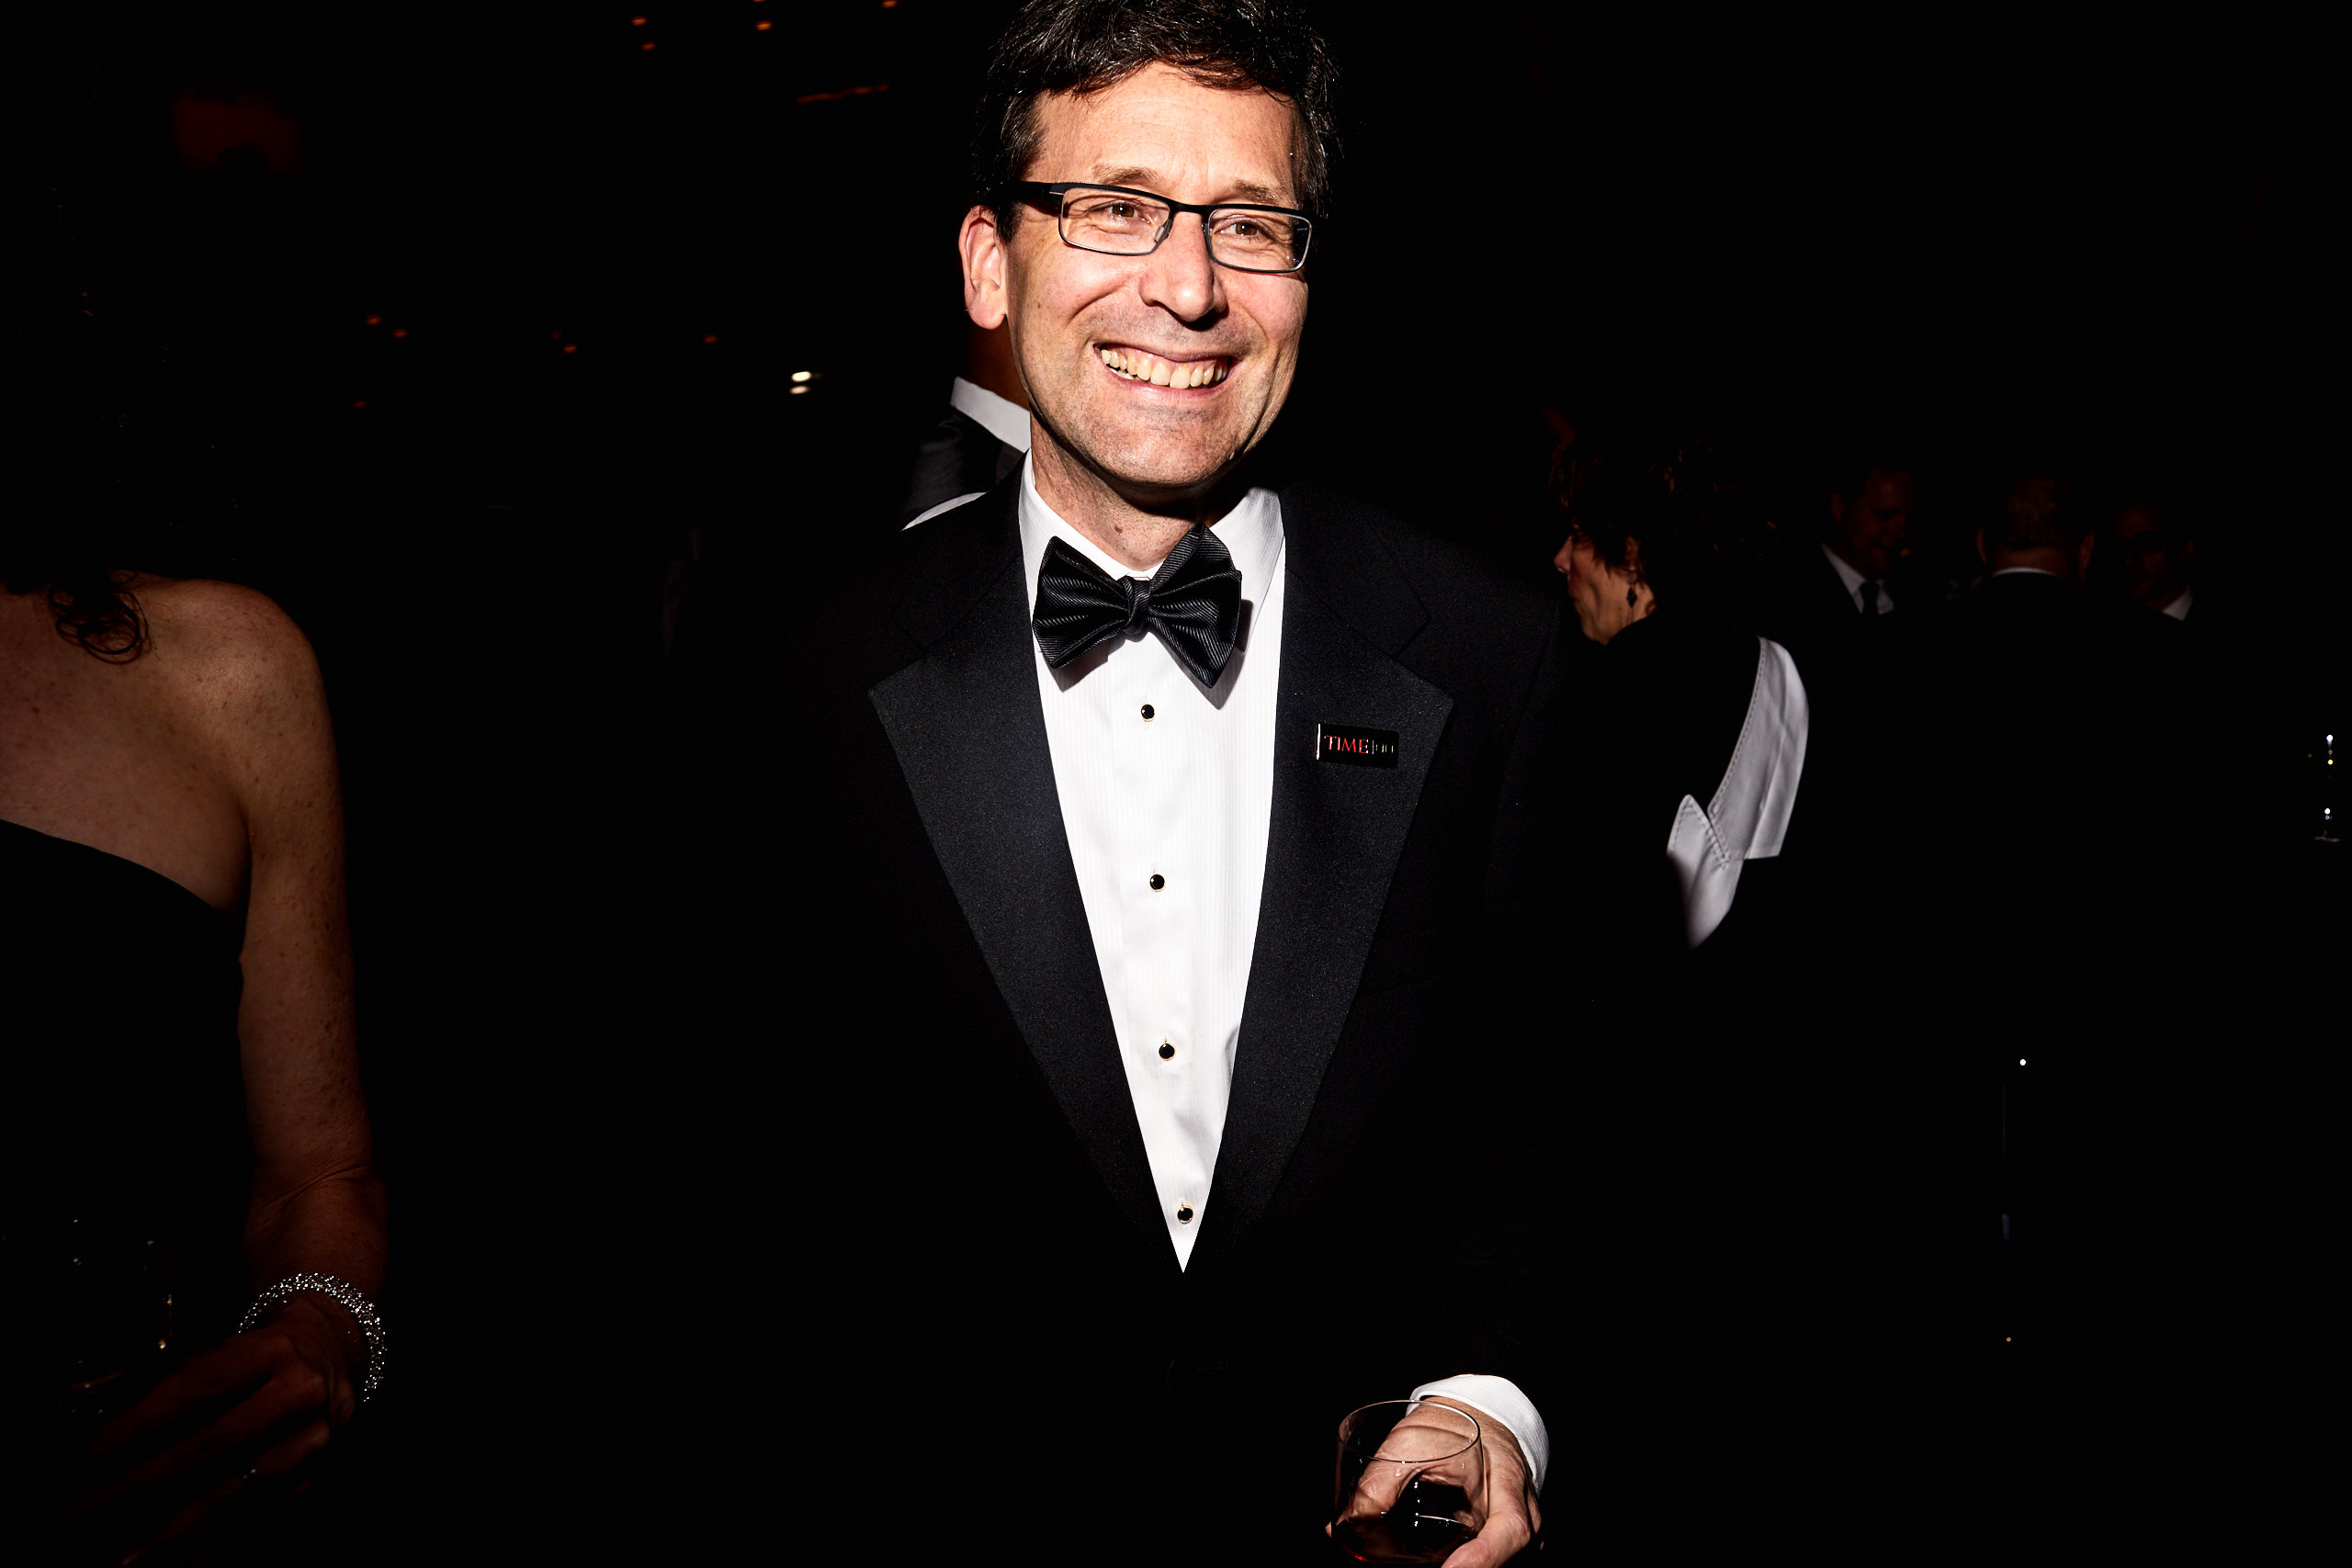 Bob Ferguson at the Time 100 Gala at Jazz at Lincoln Center on April 25, 2017 in New York City. (Landon Nordeman for TIME)